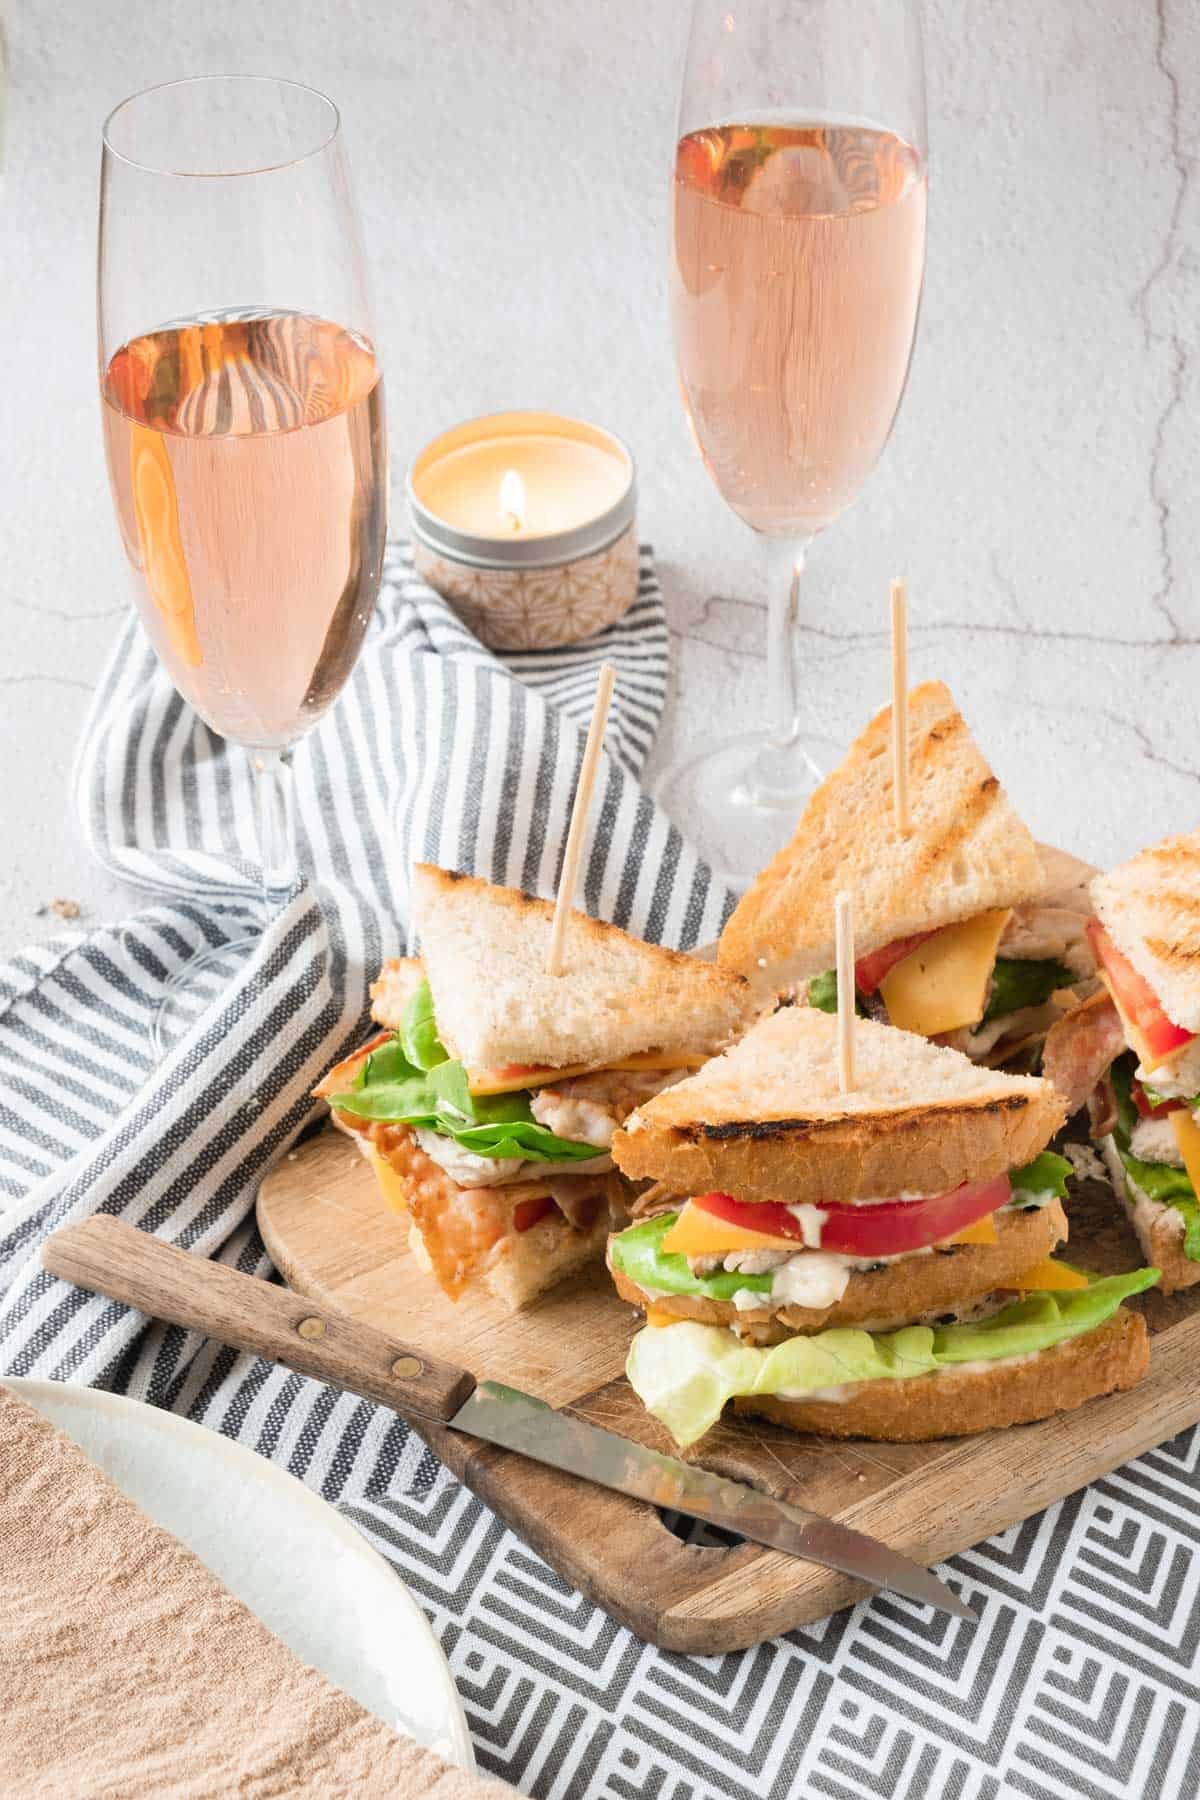 Sandwiches on a cutting board with glasses of wine.